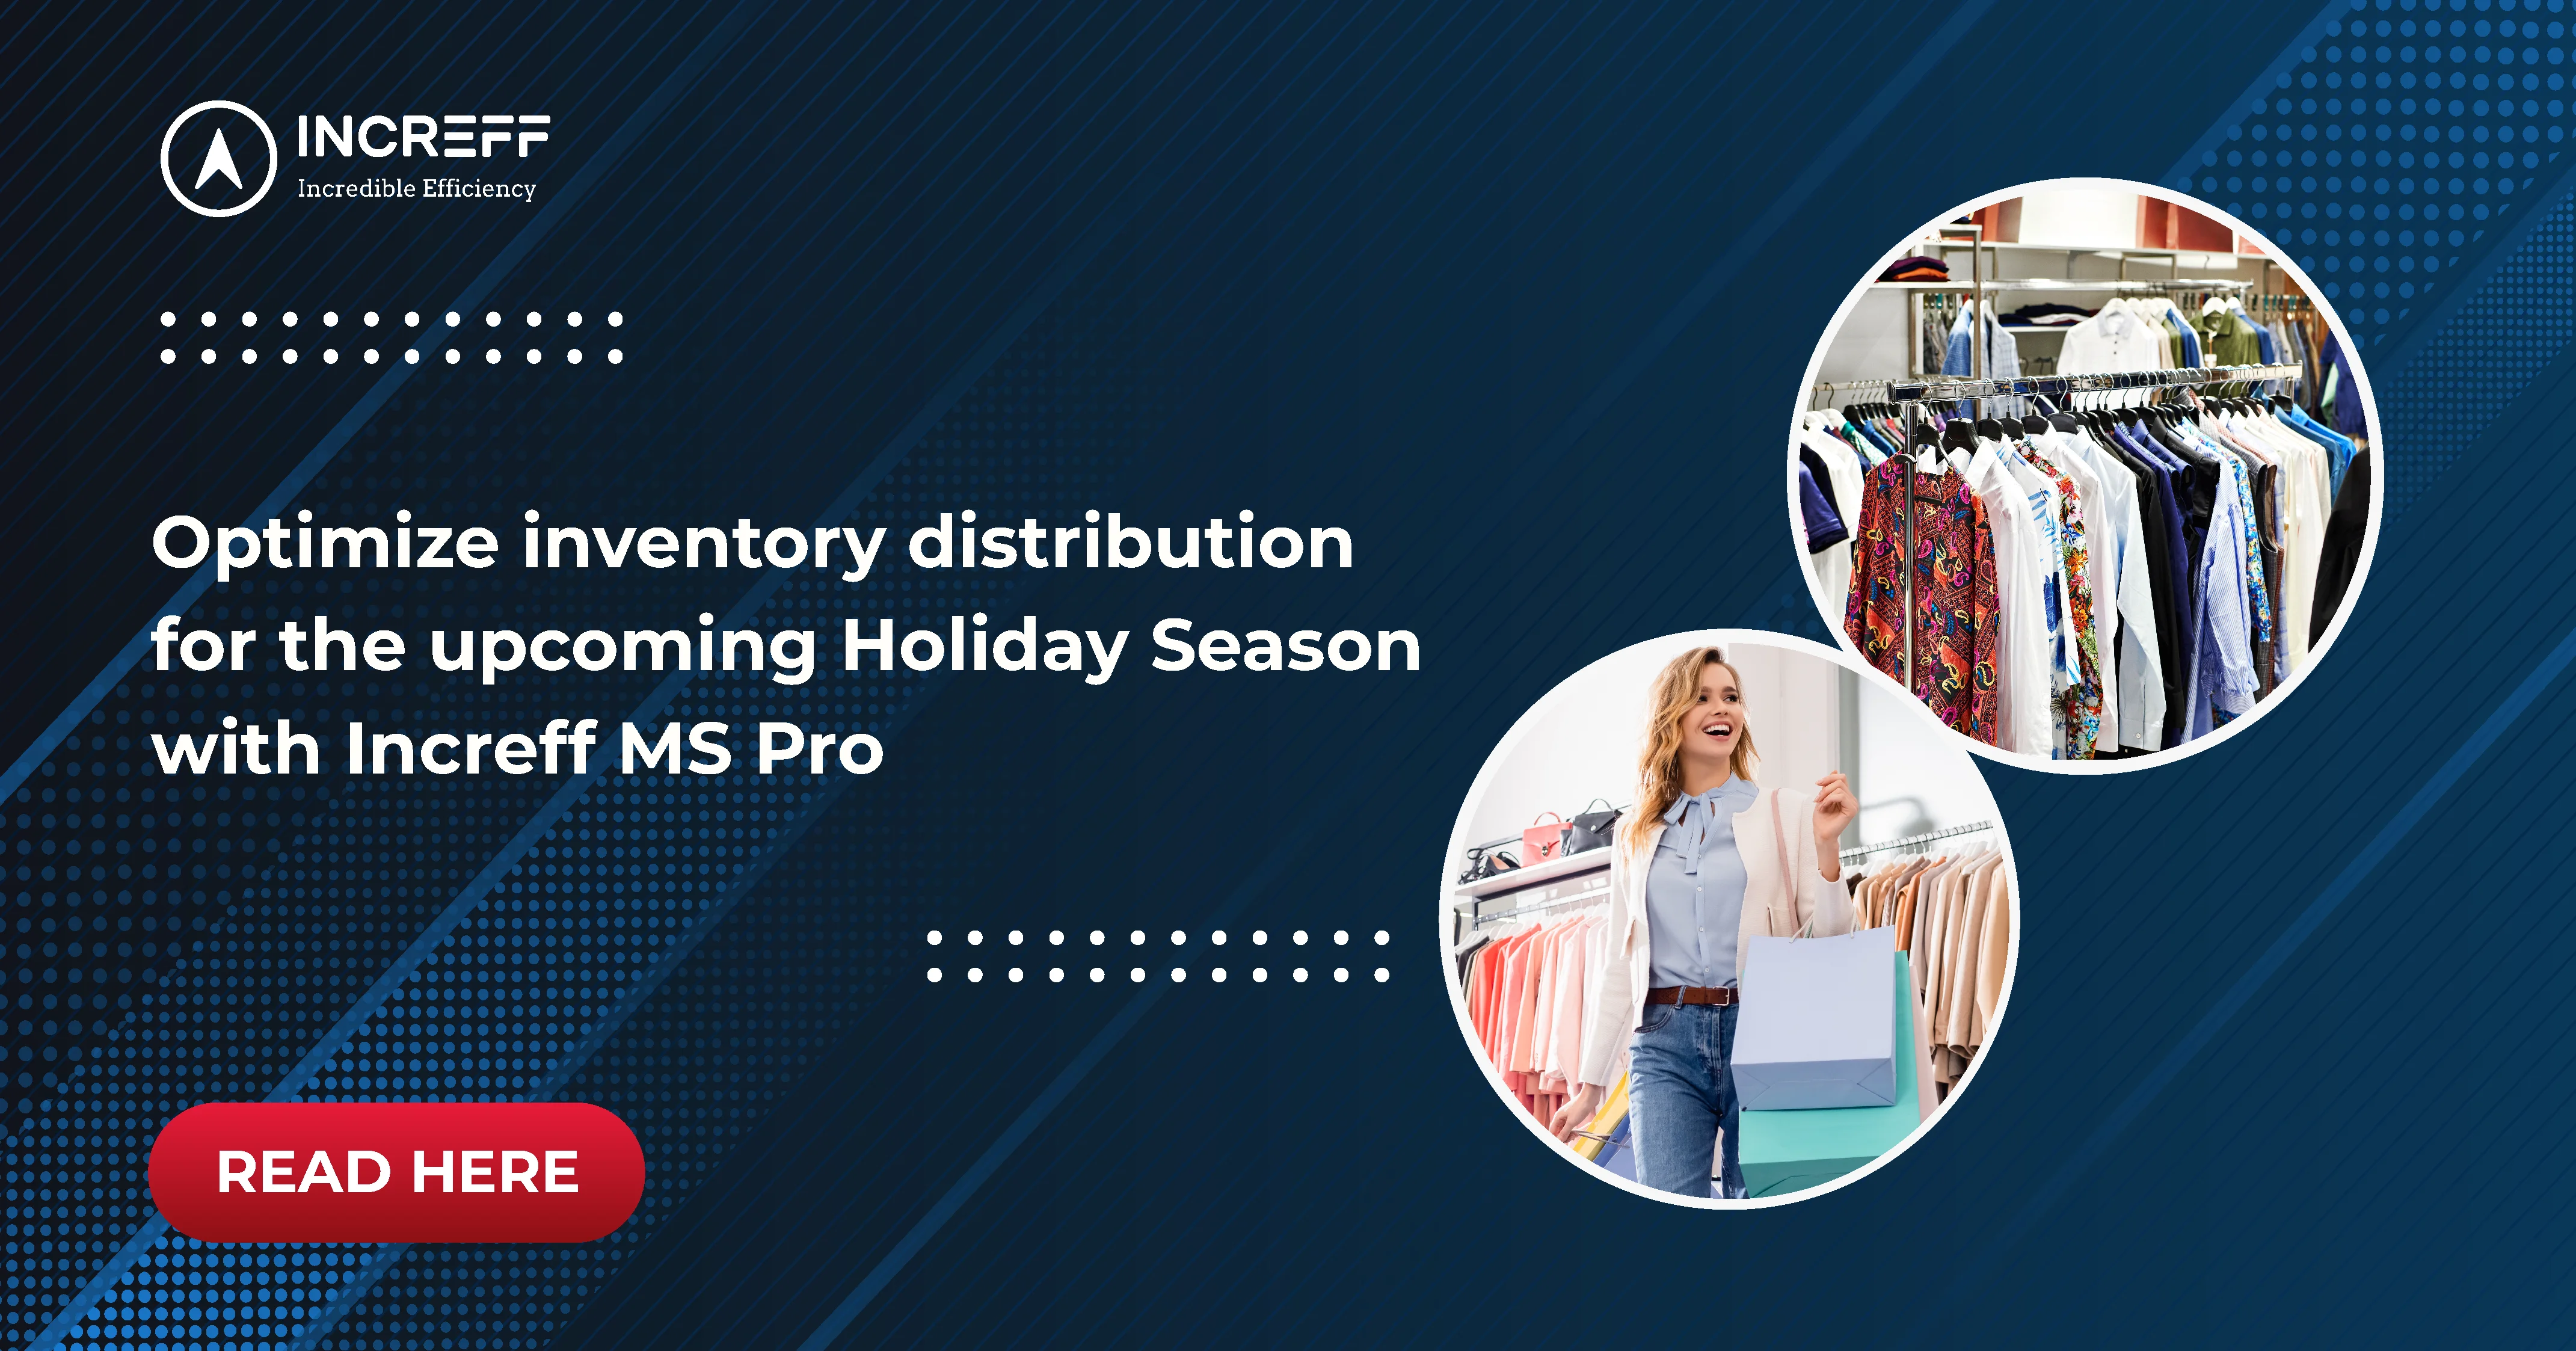 Optimize inventory distribution this holiday season with Increff MS Pro